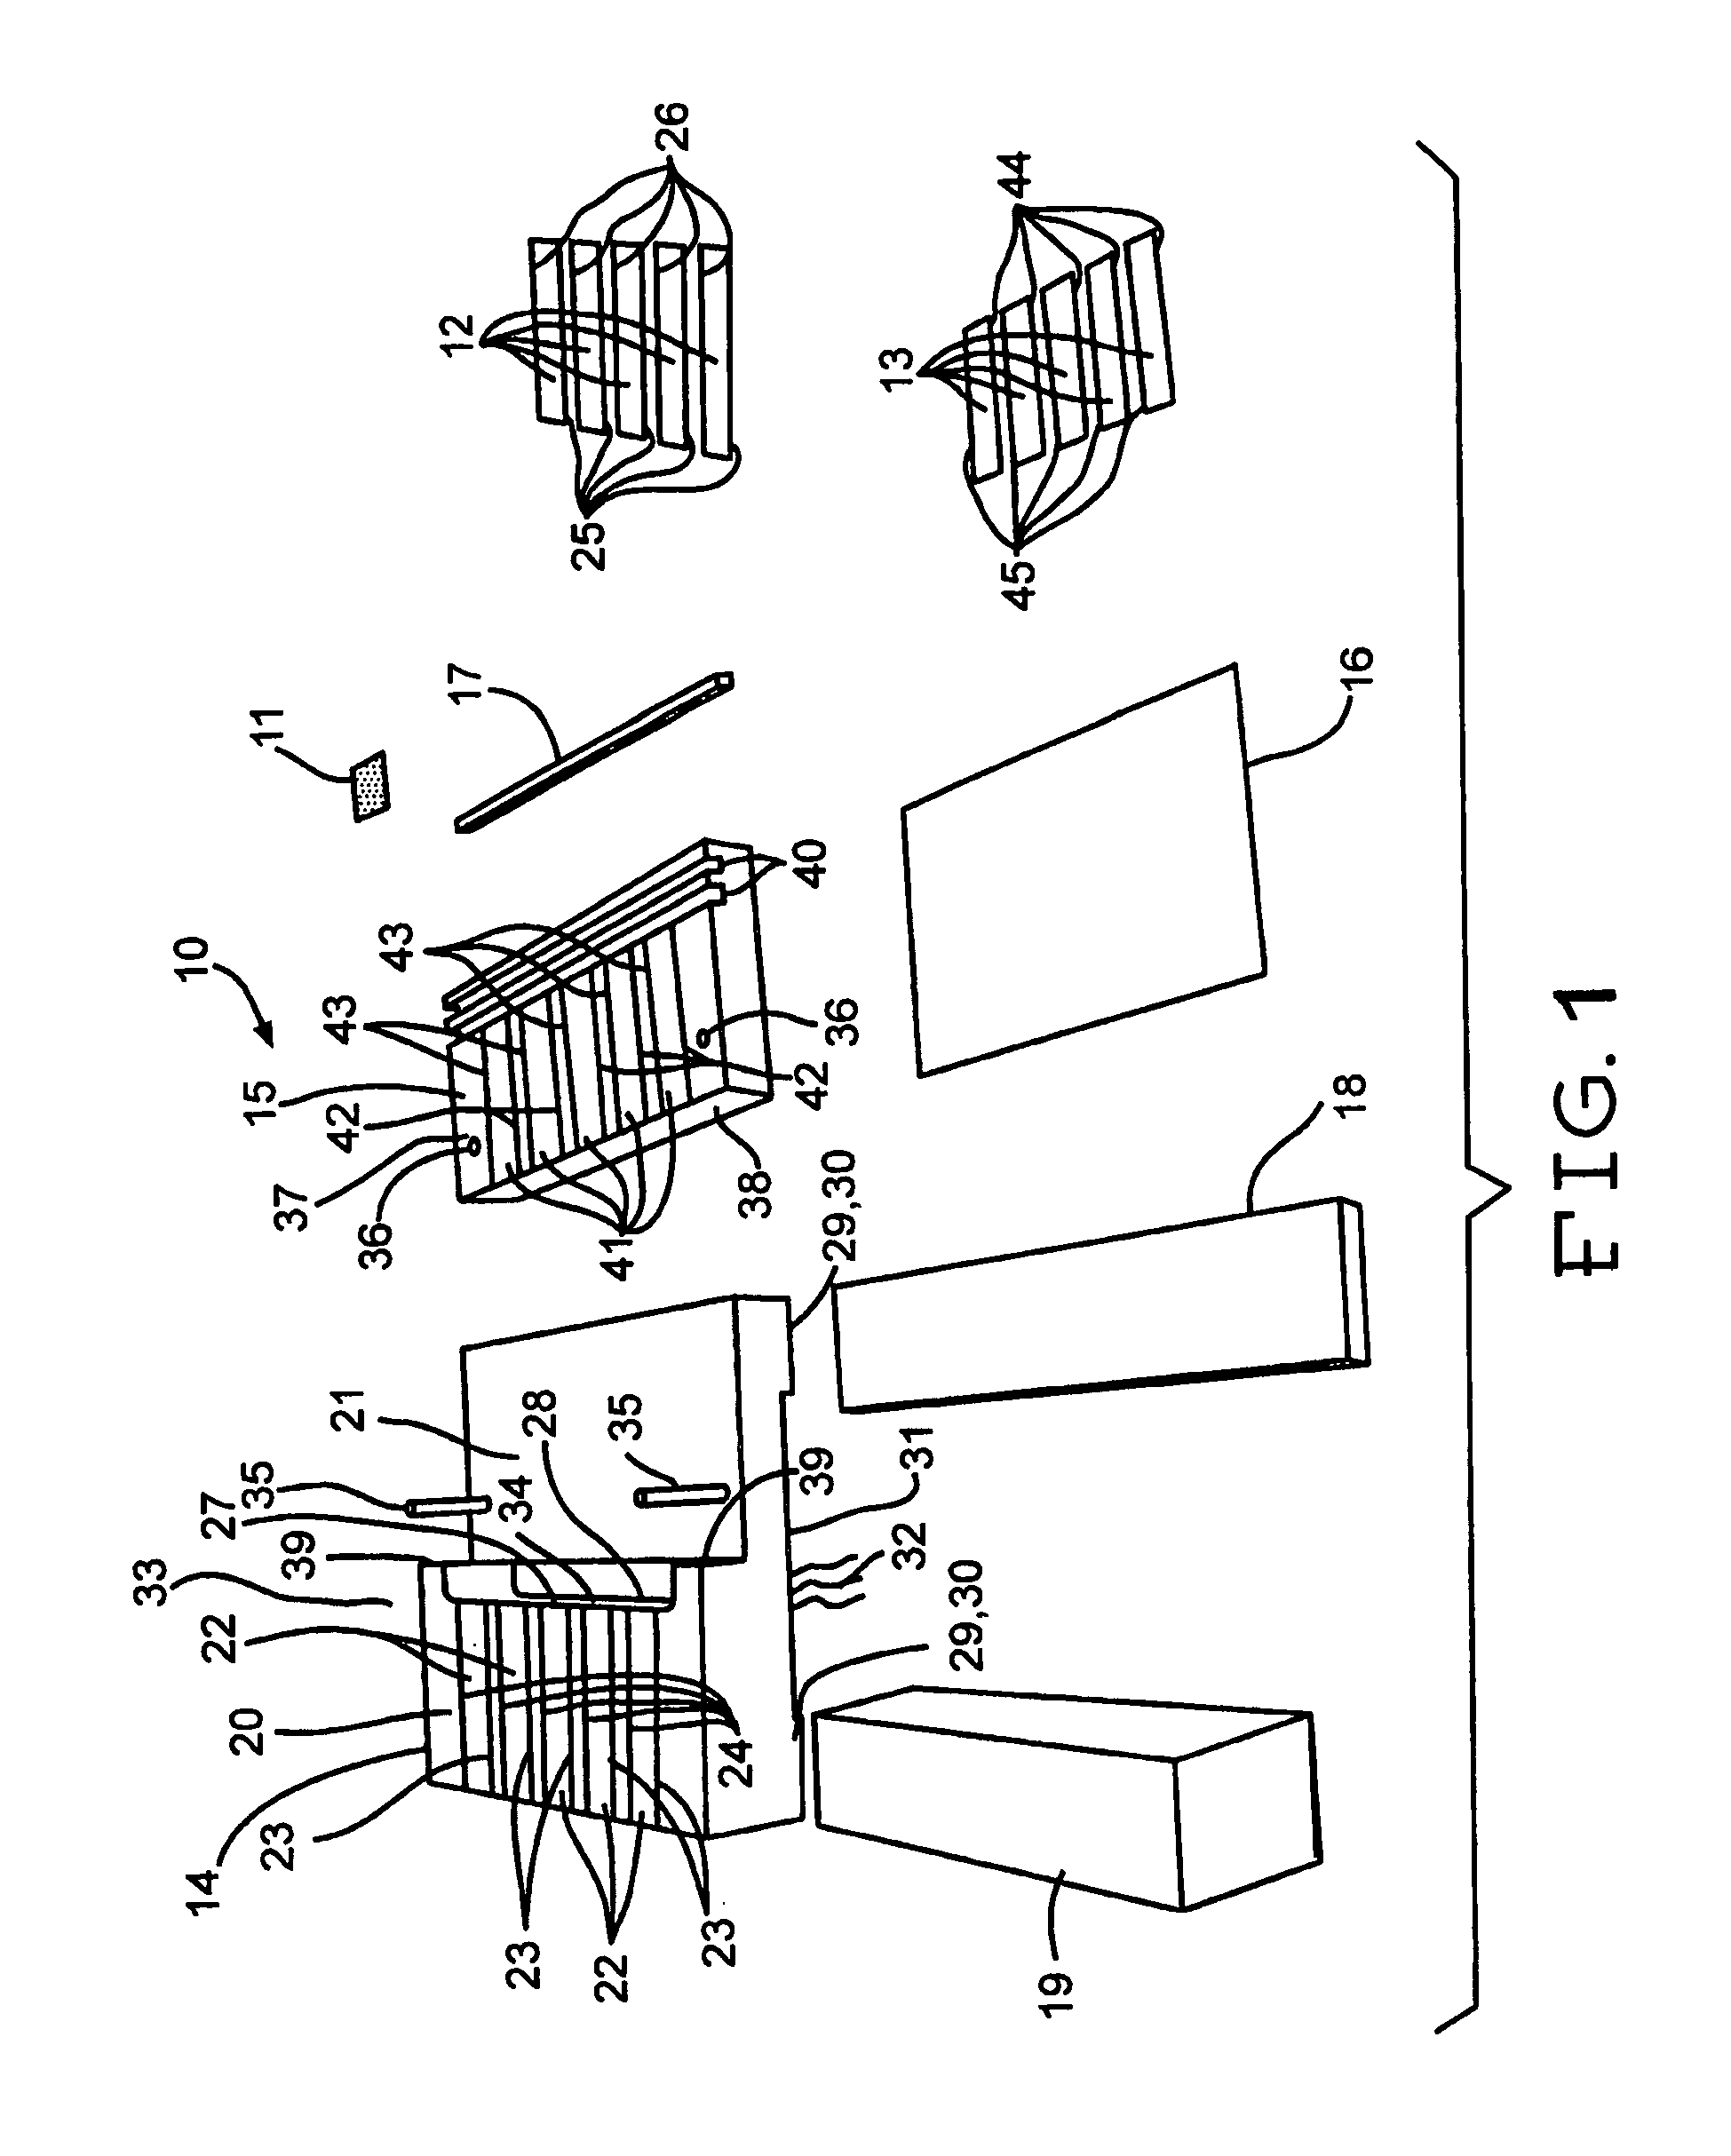 Apparatus and method for fabricating shear test coupons